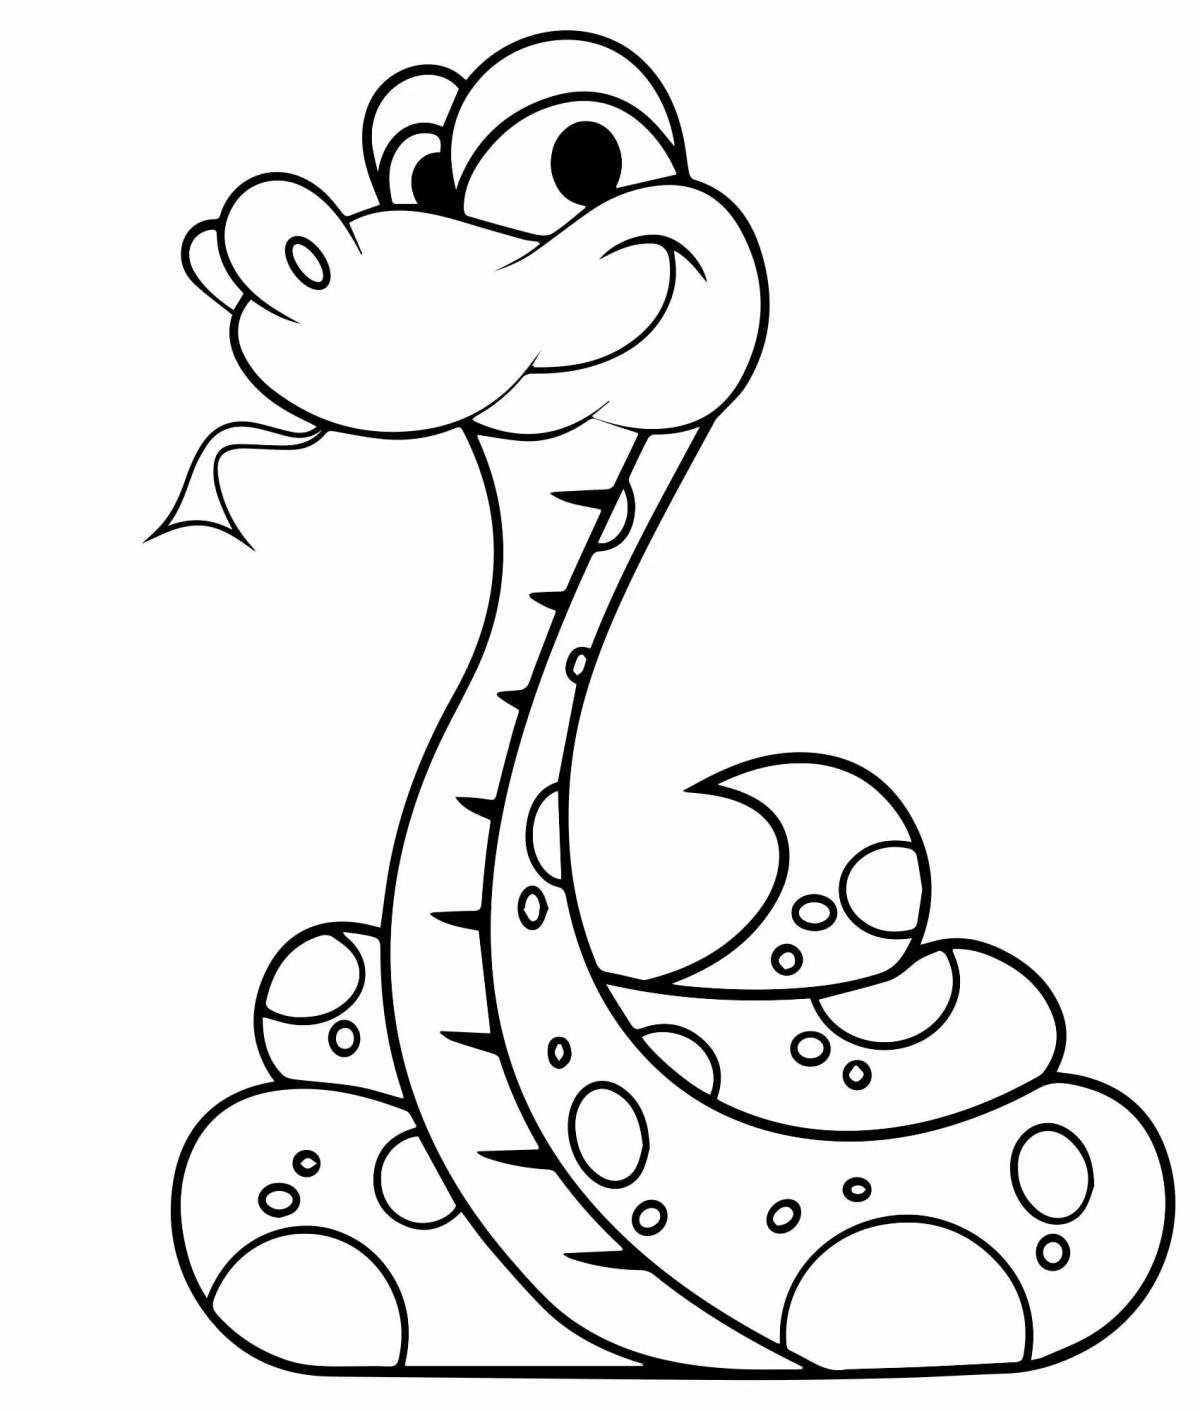 Fun snake coloring book for 3-4 year olds